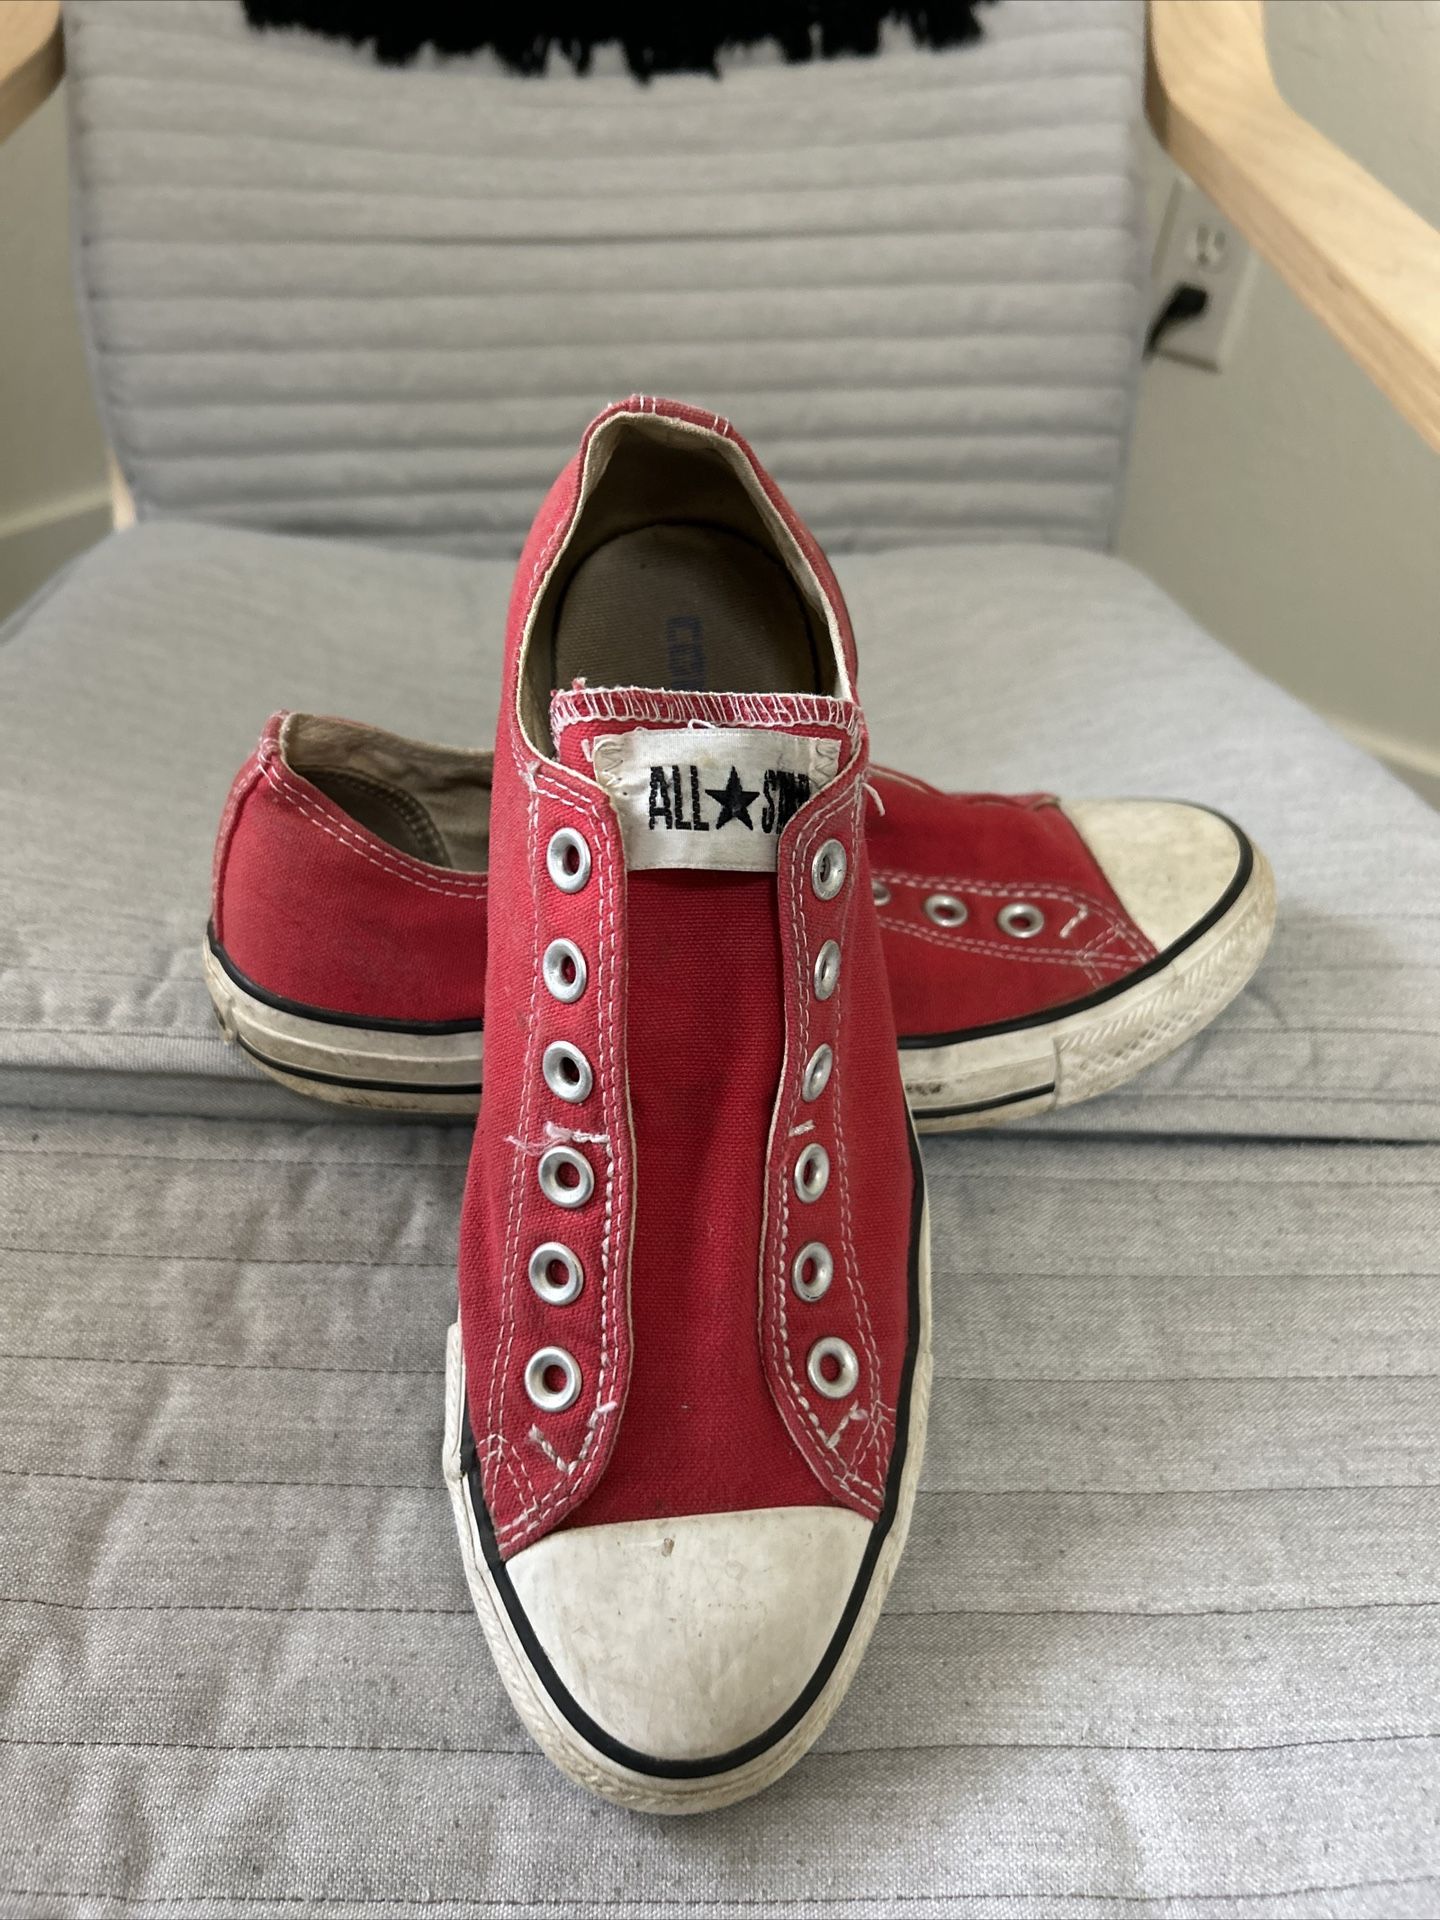 Converse Chuck Taylor All Star Slip On Women’s 8.5 Red Laceless Sneakers